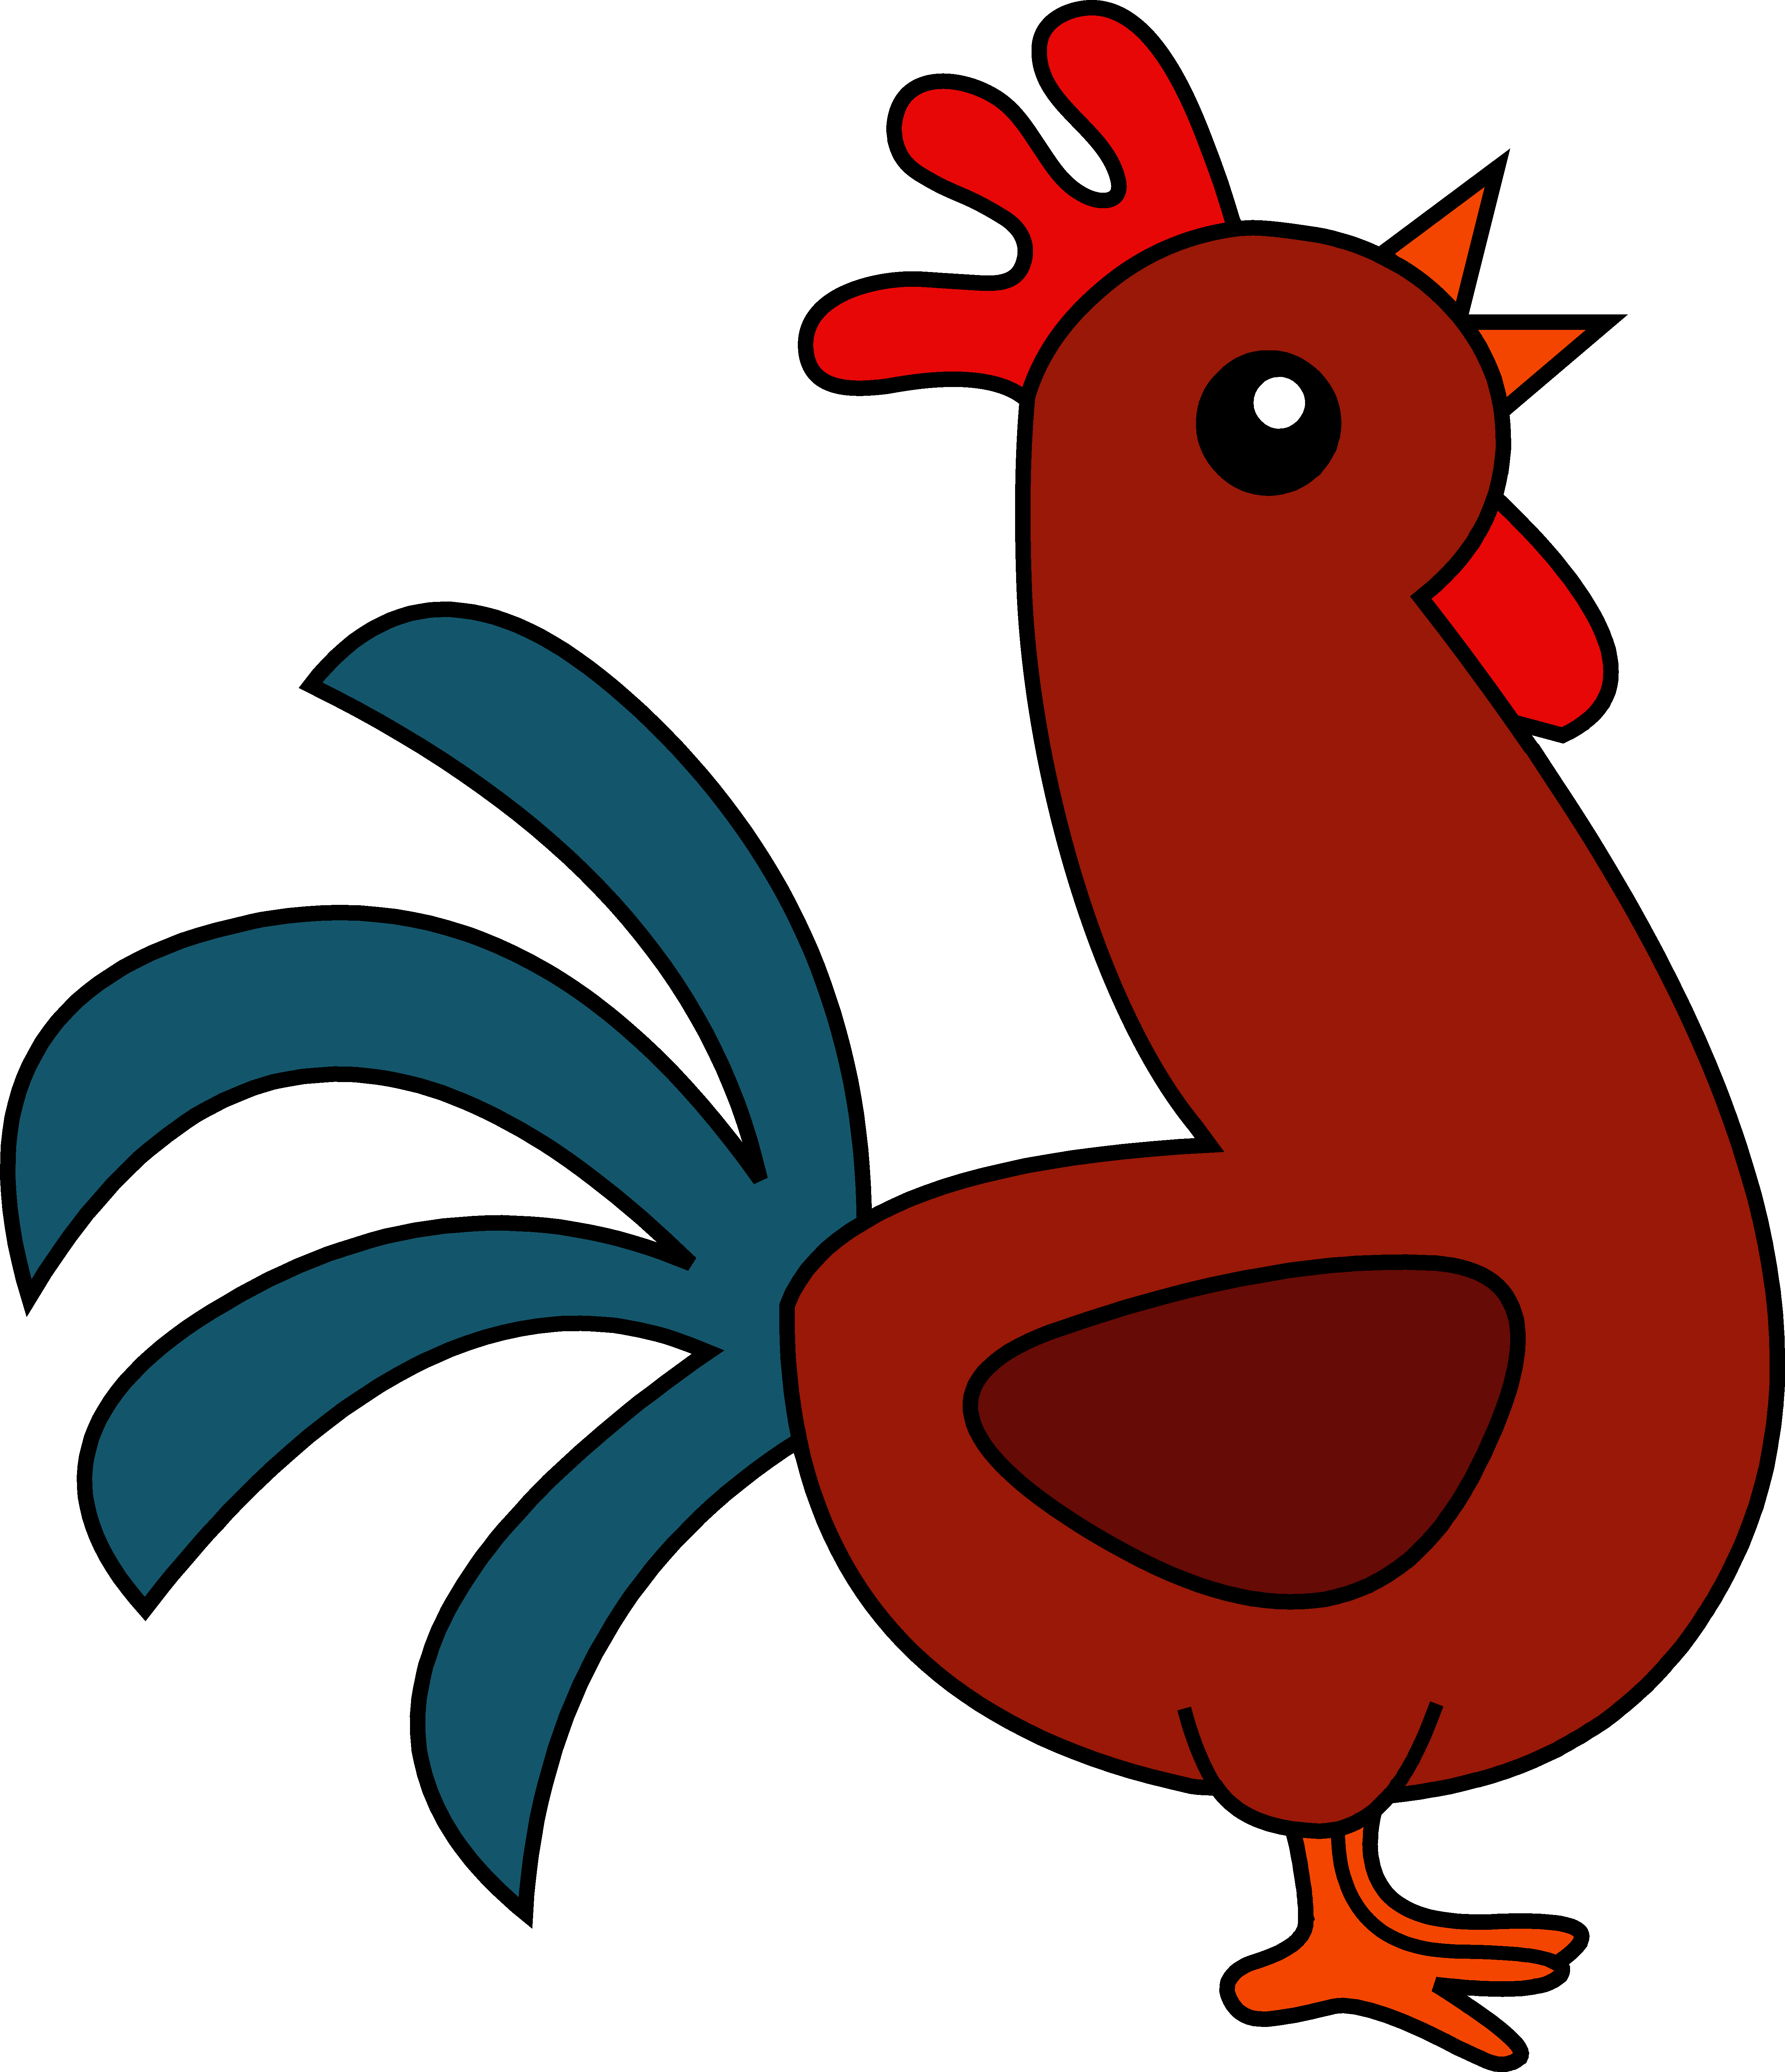 rooster clip art free pictures - photo #9